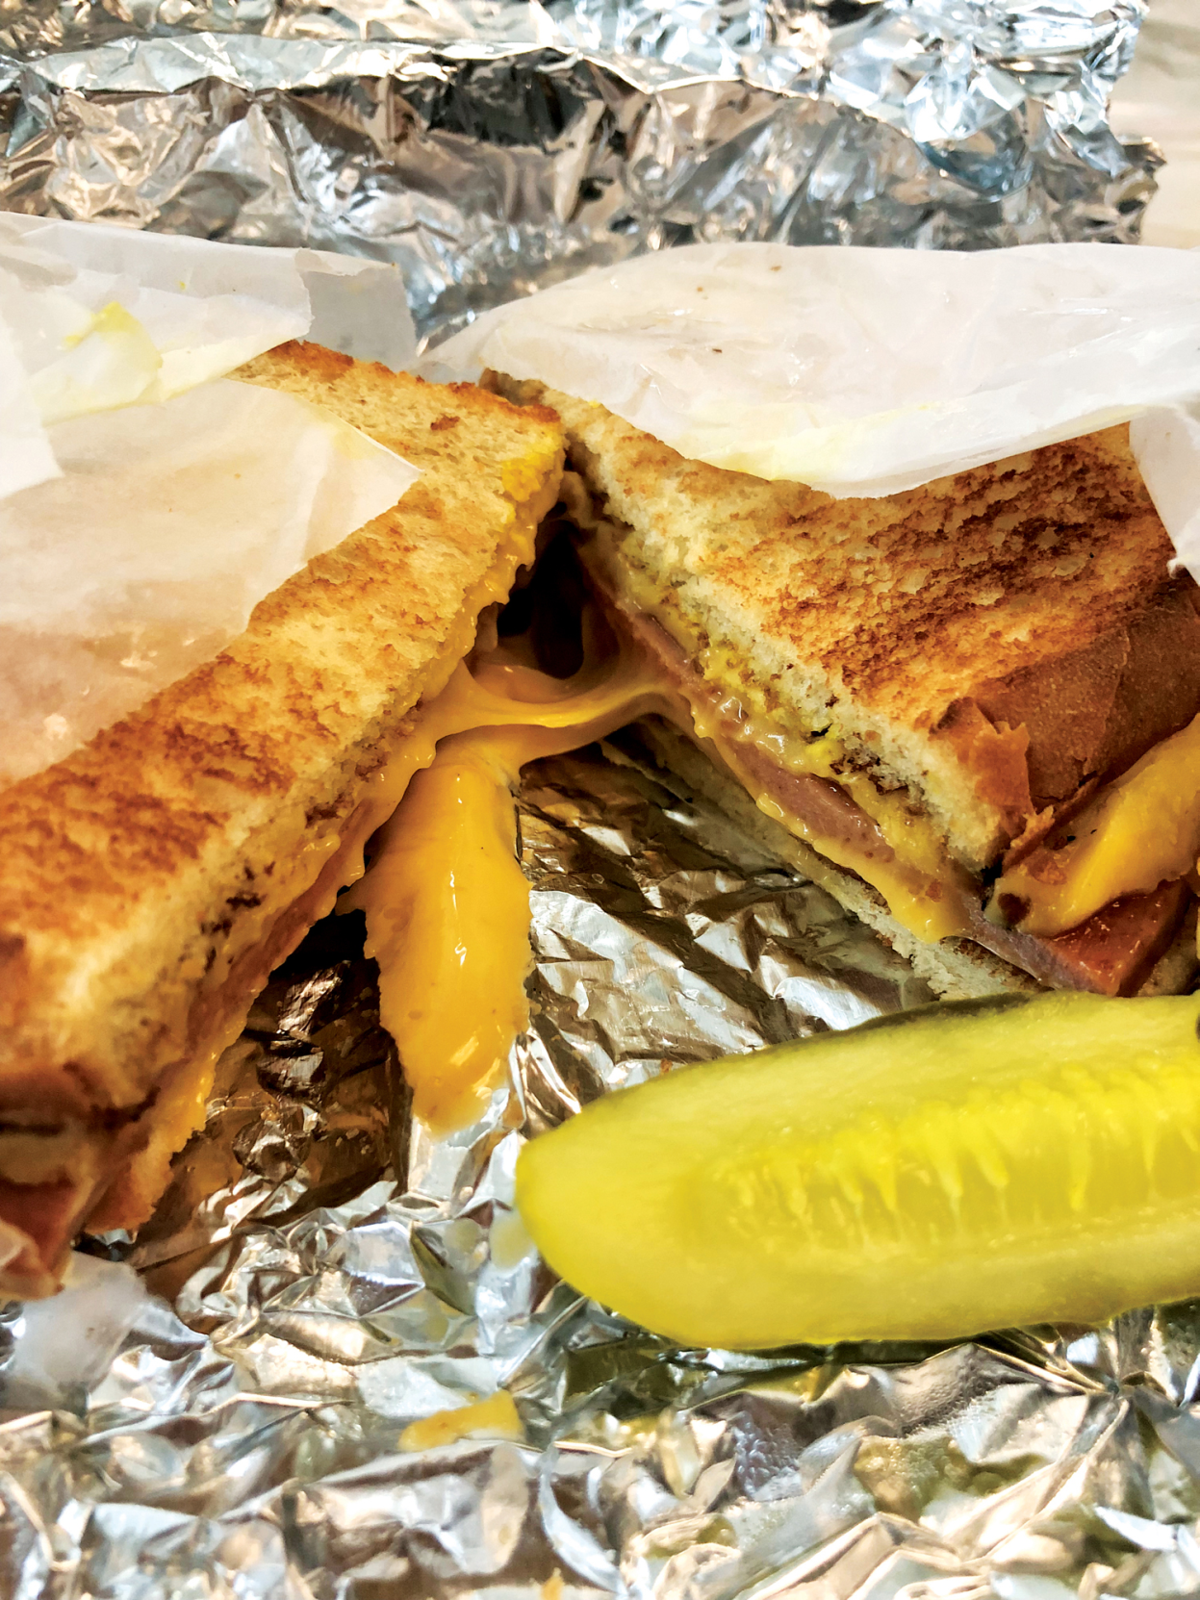 Cheap Eats: Tower Market and Deli — Southern Favorite — $5.99